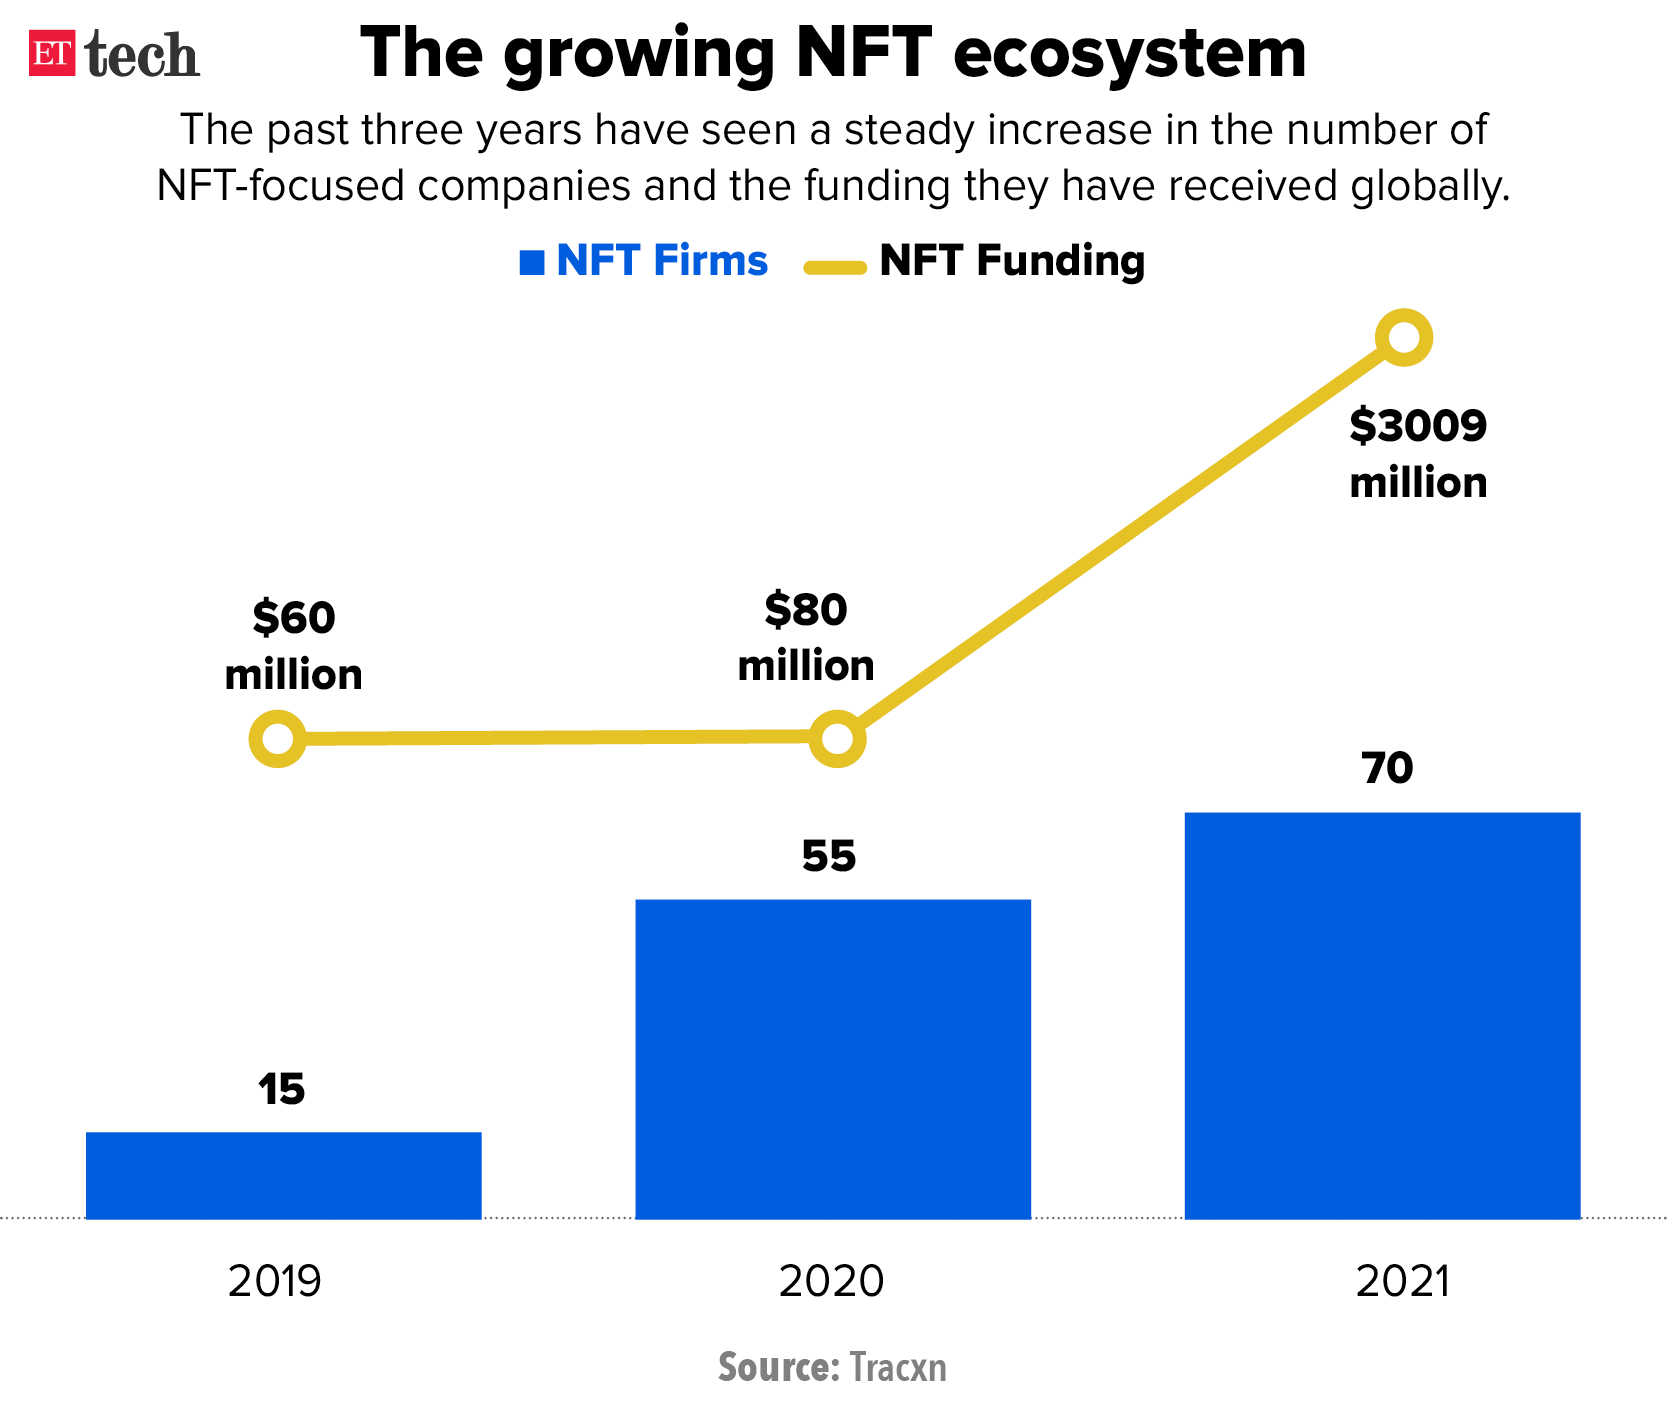 The growing NFT ecosystem